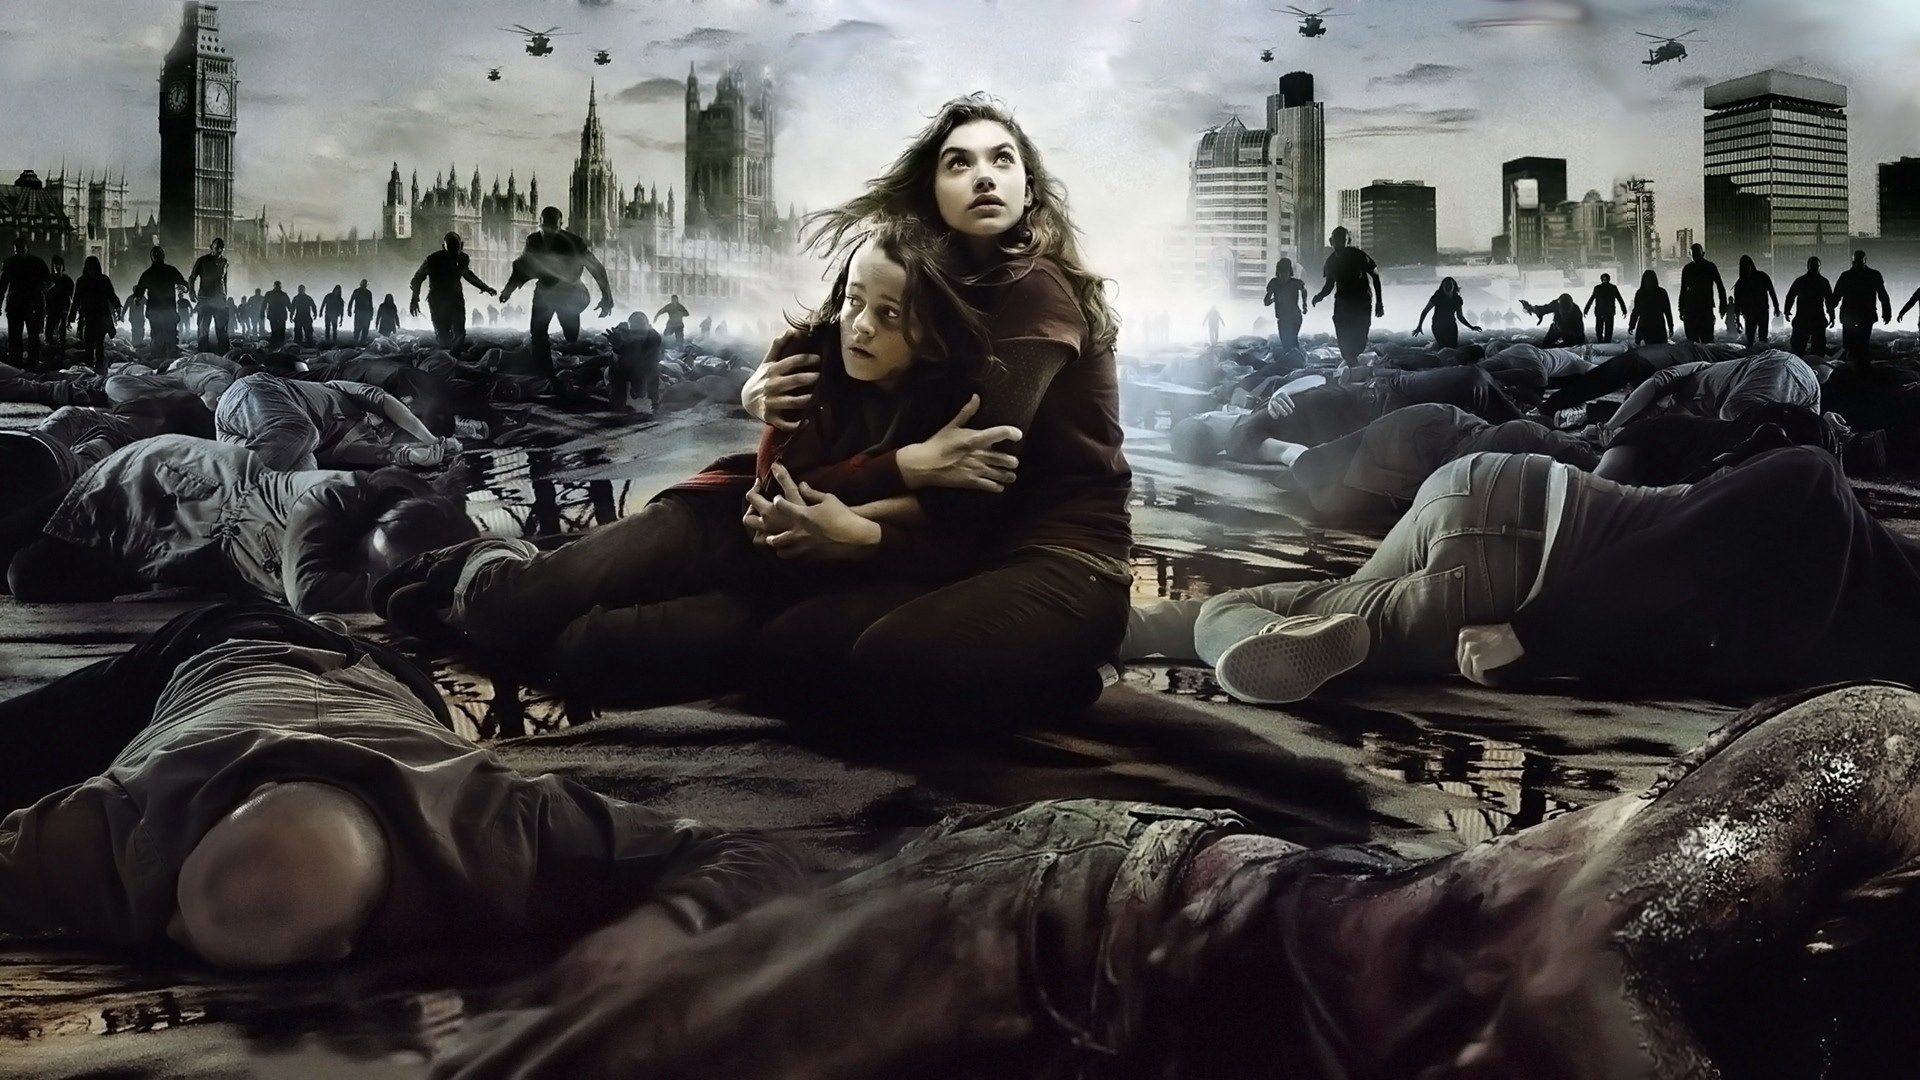 28 Weeks Later Imogen Poots 1920x1080